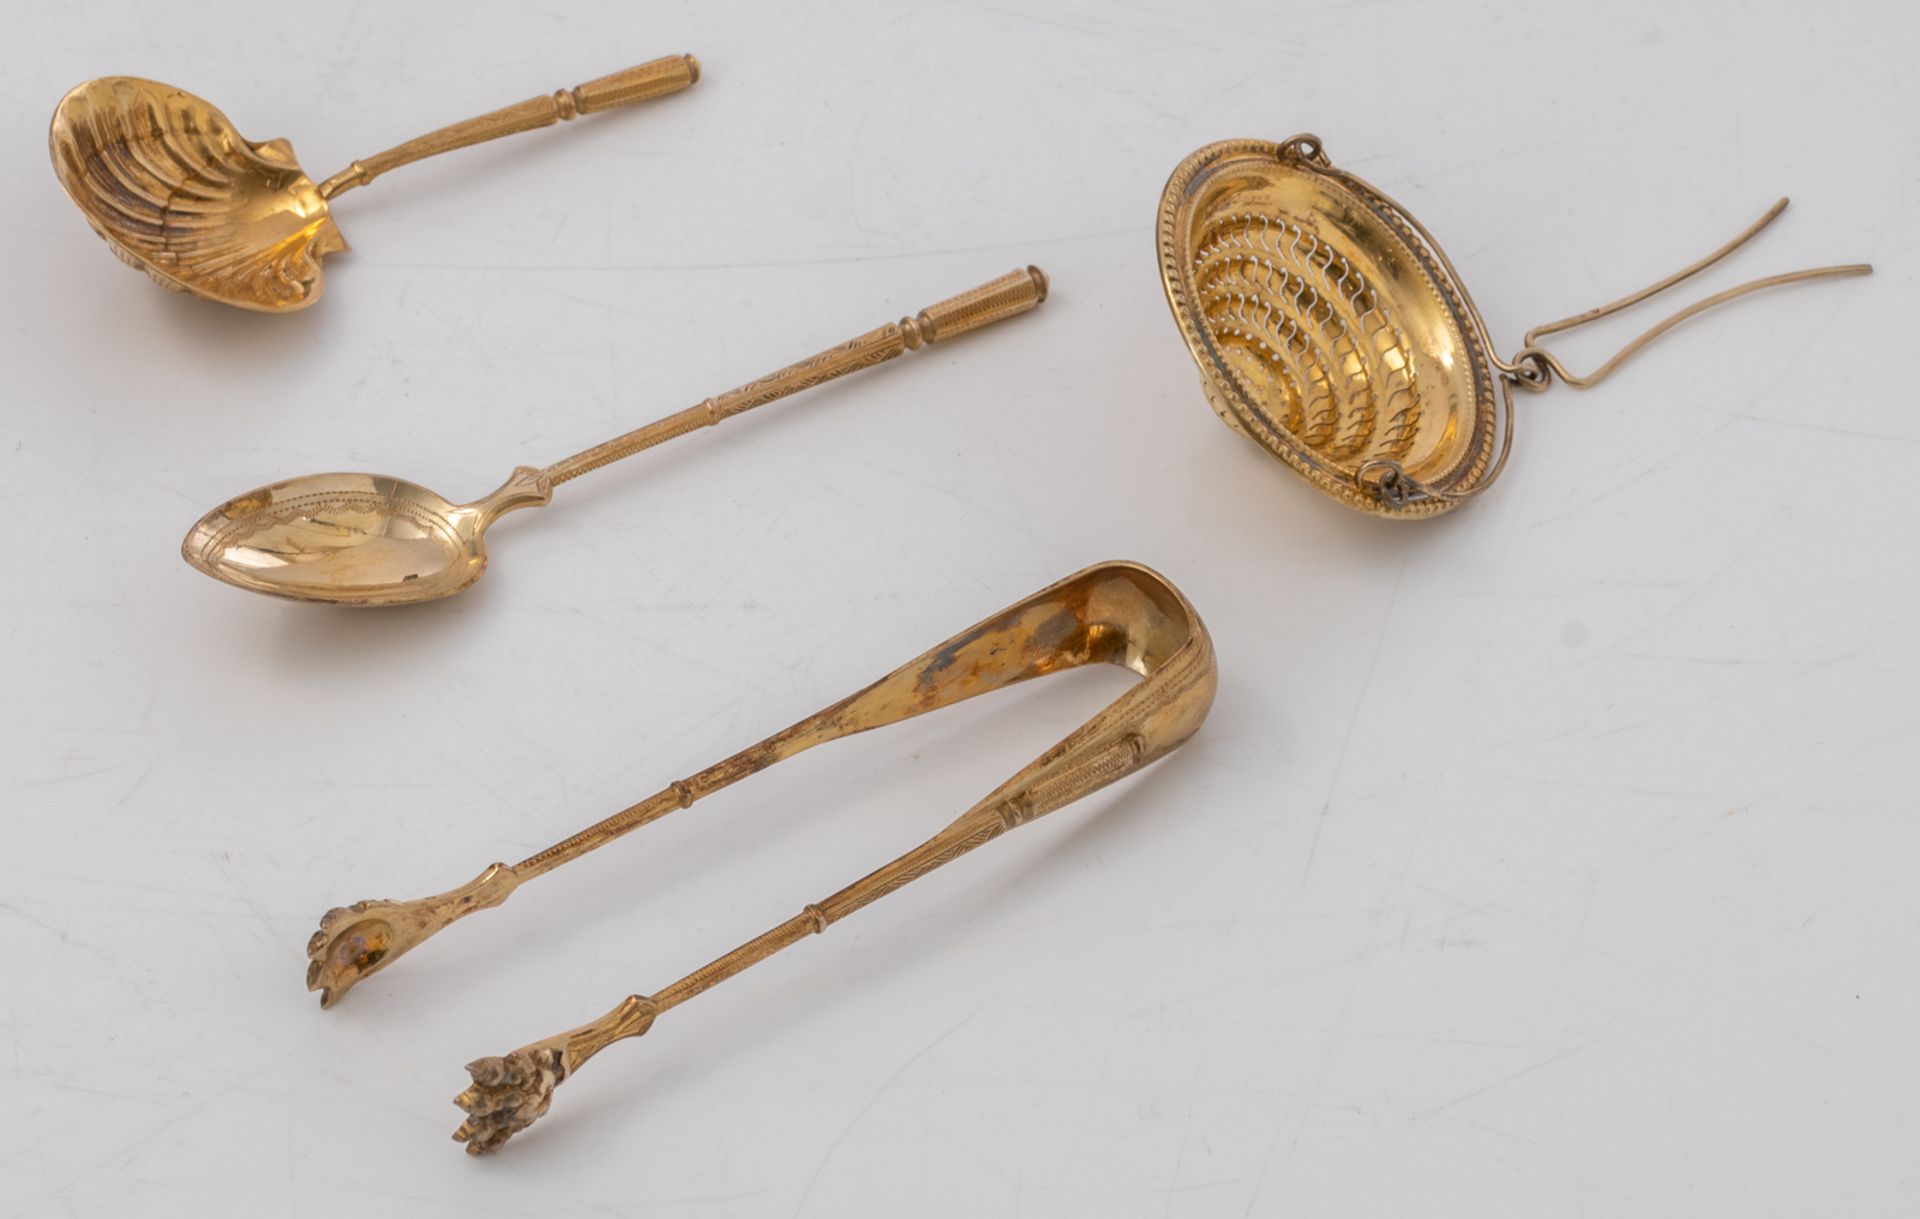 A 19thC French silver vermeil tea set with 24 spoons, a tea strainer and a tong, in a heart-shaped M - Bild 2 aus 5